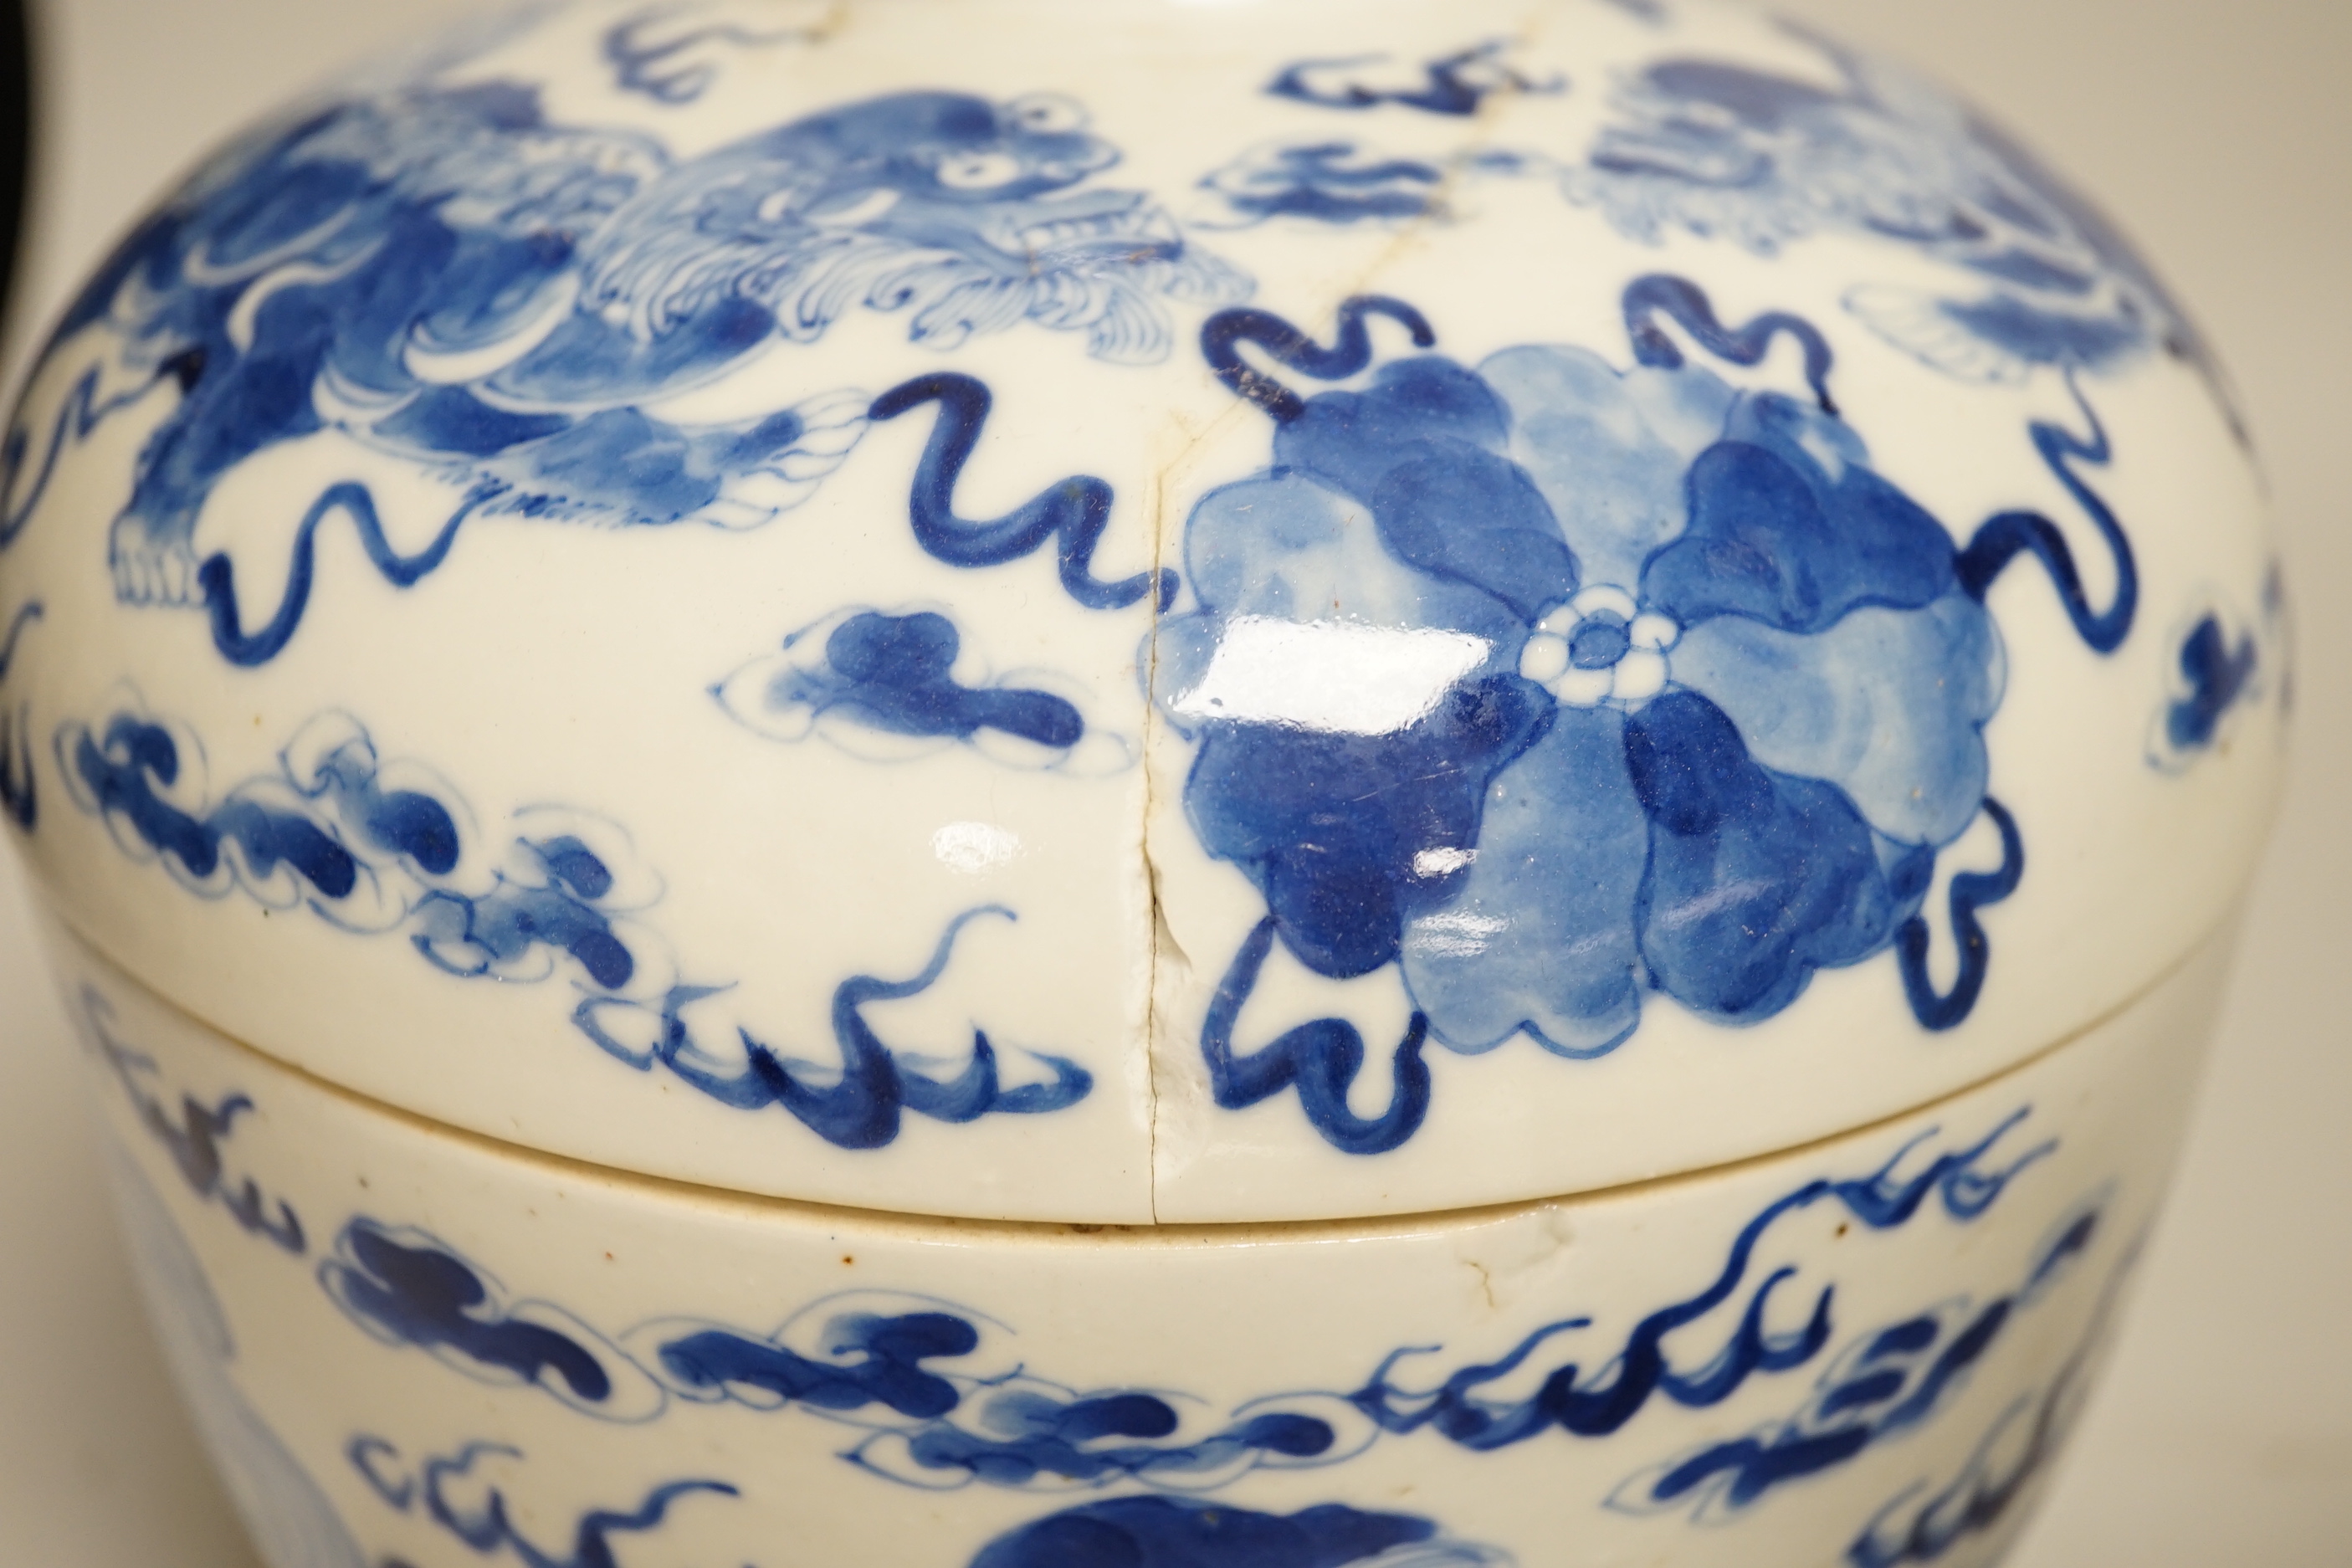 A pair of Chinese blue and white 'Buddhist lion' bowls and covers, chupu, probably made for the Straits market, late 19th century, 20cm high